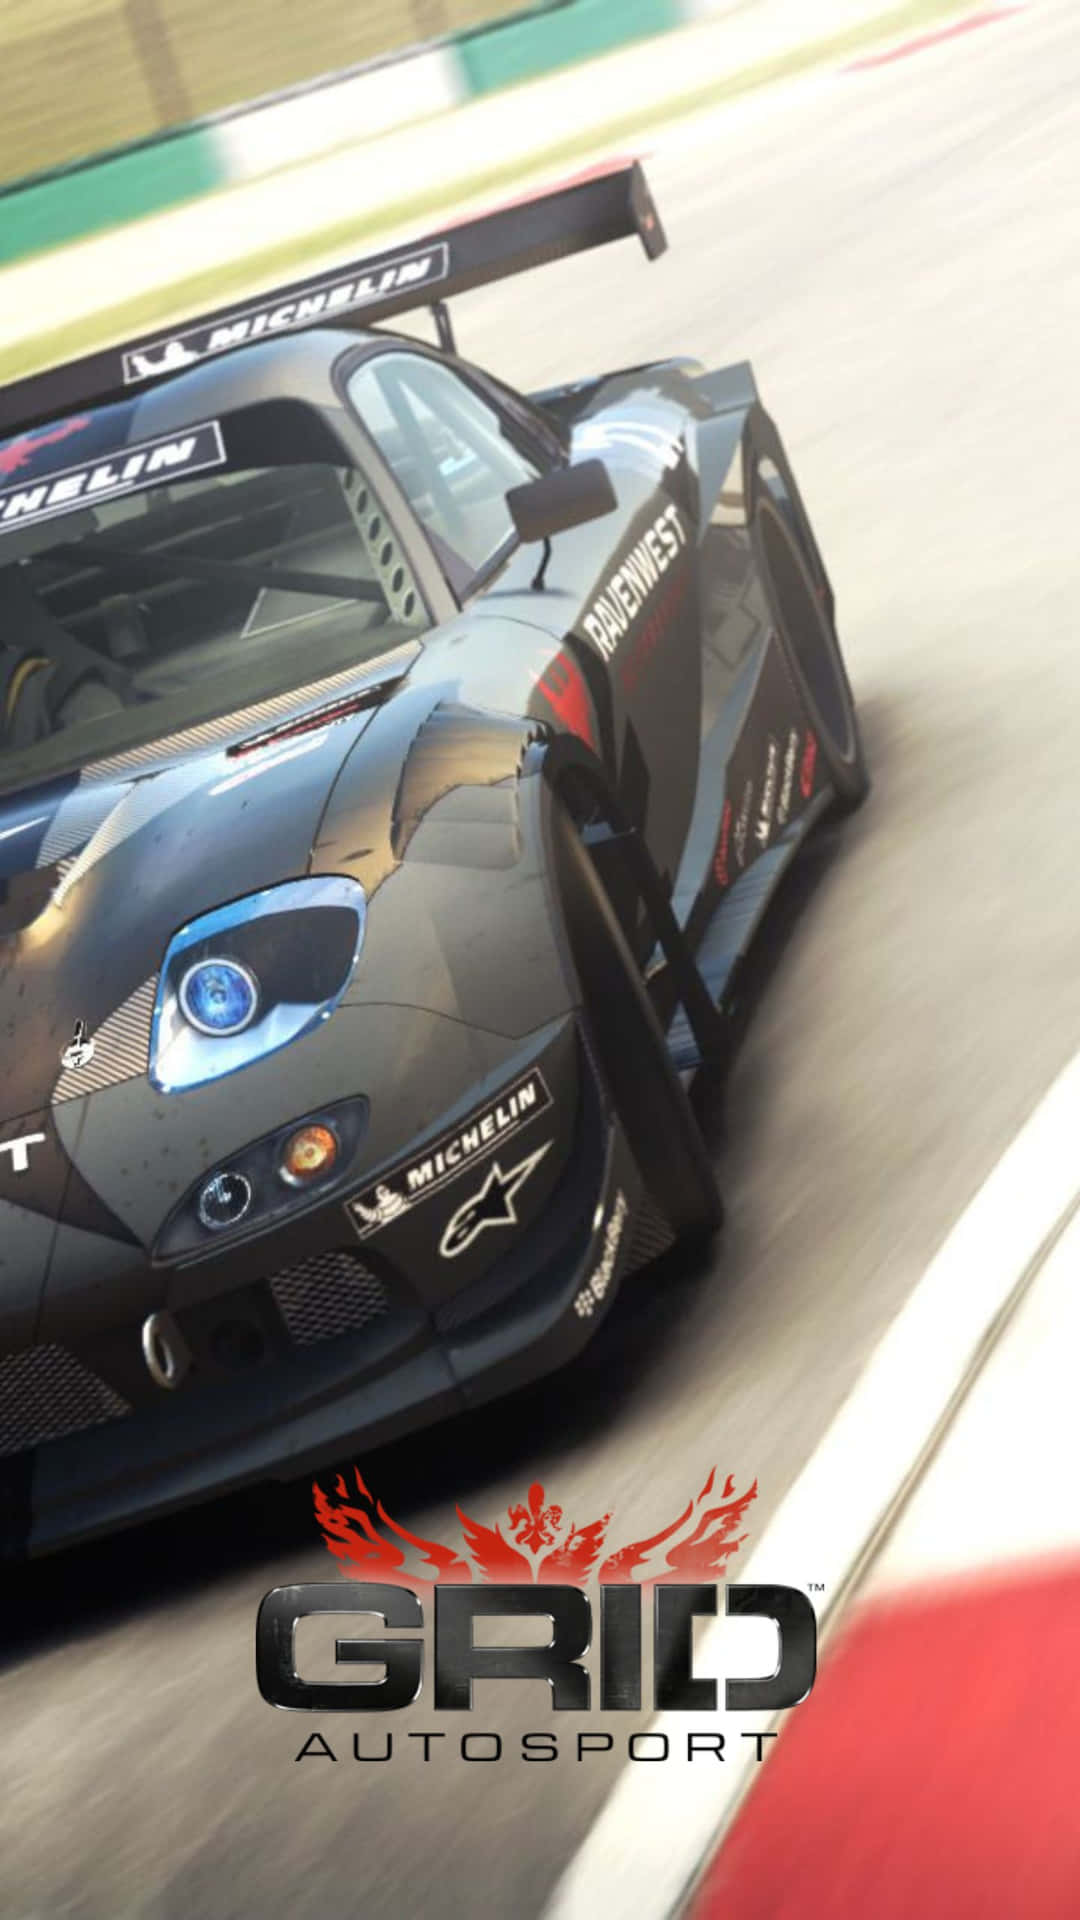 Race to Victory in Android Grid Autosport